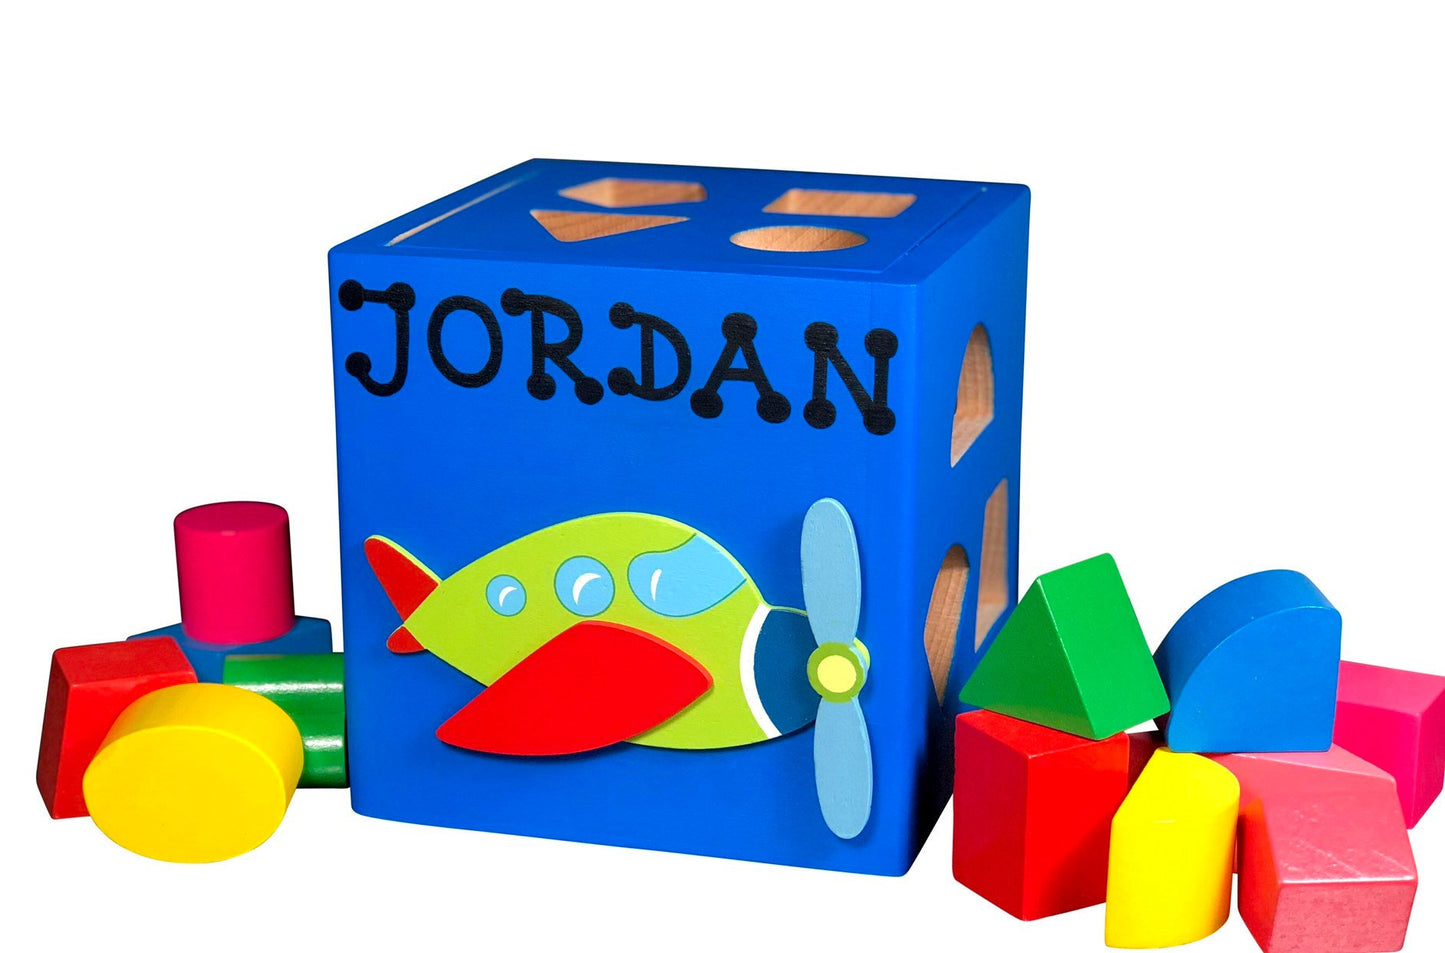 Personalized wooden plane toys for baby boy / custom shape box